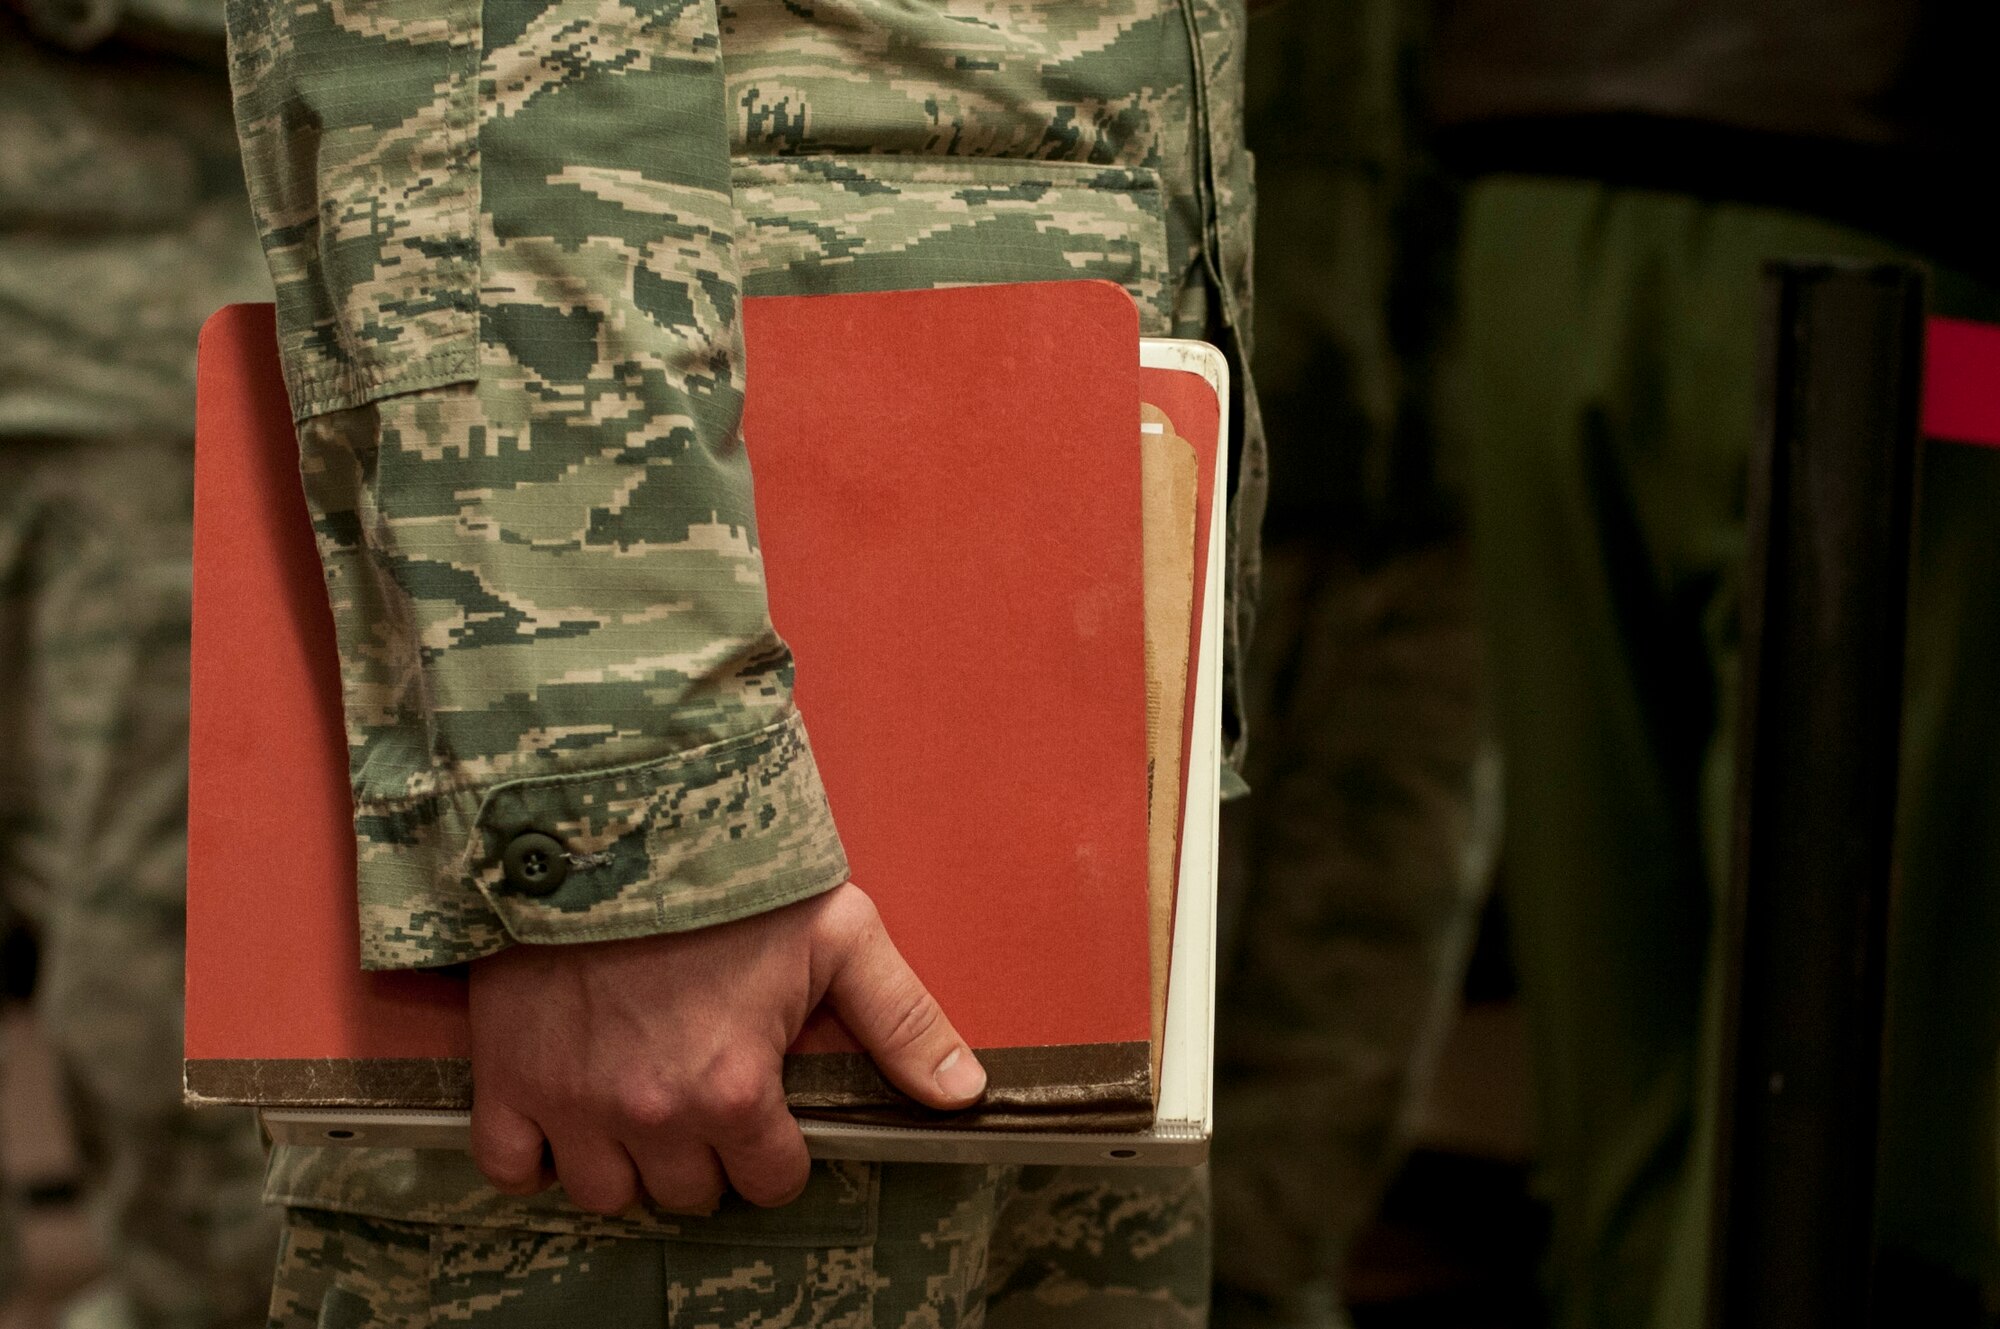 An Airman with the 5th Munitions Squadron holds a deployment folder at Minot Air Force Base, N.D., Feb. 23, 2017. The personnel deployment function line provides services from various units including the 5th Force Support Squadron, medical, chapel and finance. (U.S. Air Force photo/Airman 1st Class Jonathan McElderry)